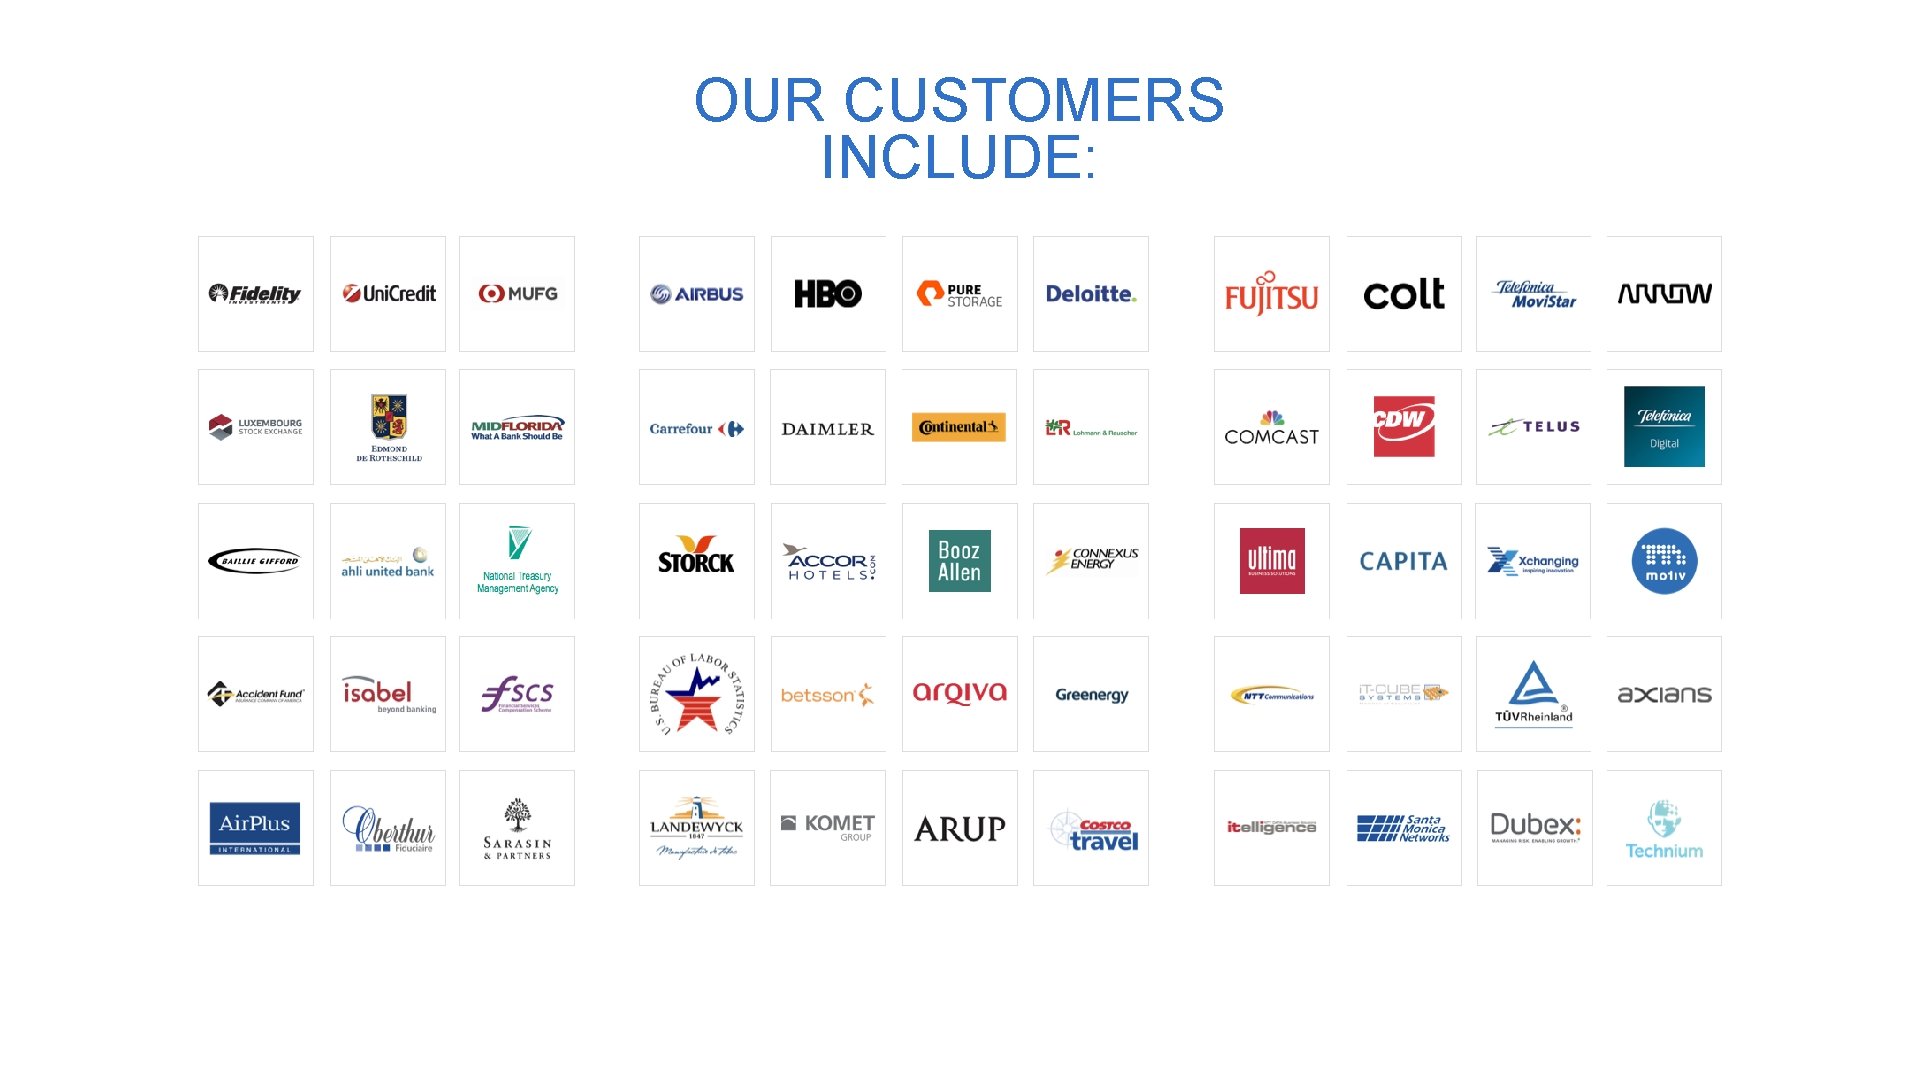 OUR CUSTOMERS INCLUDE: 